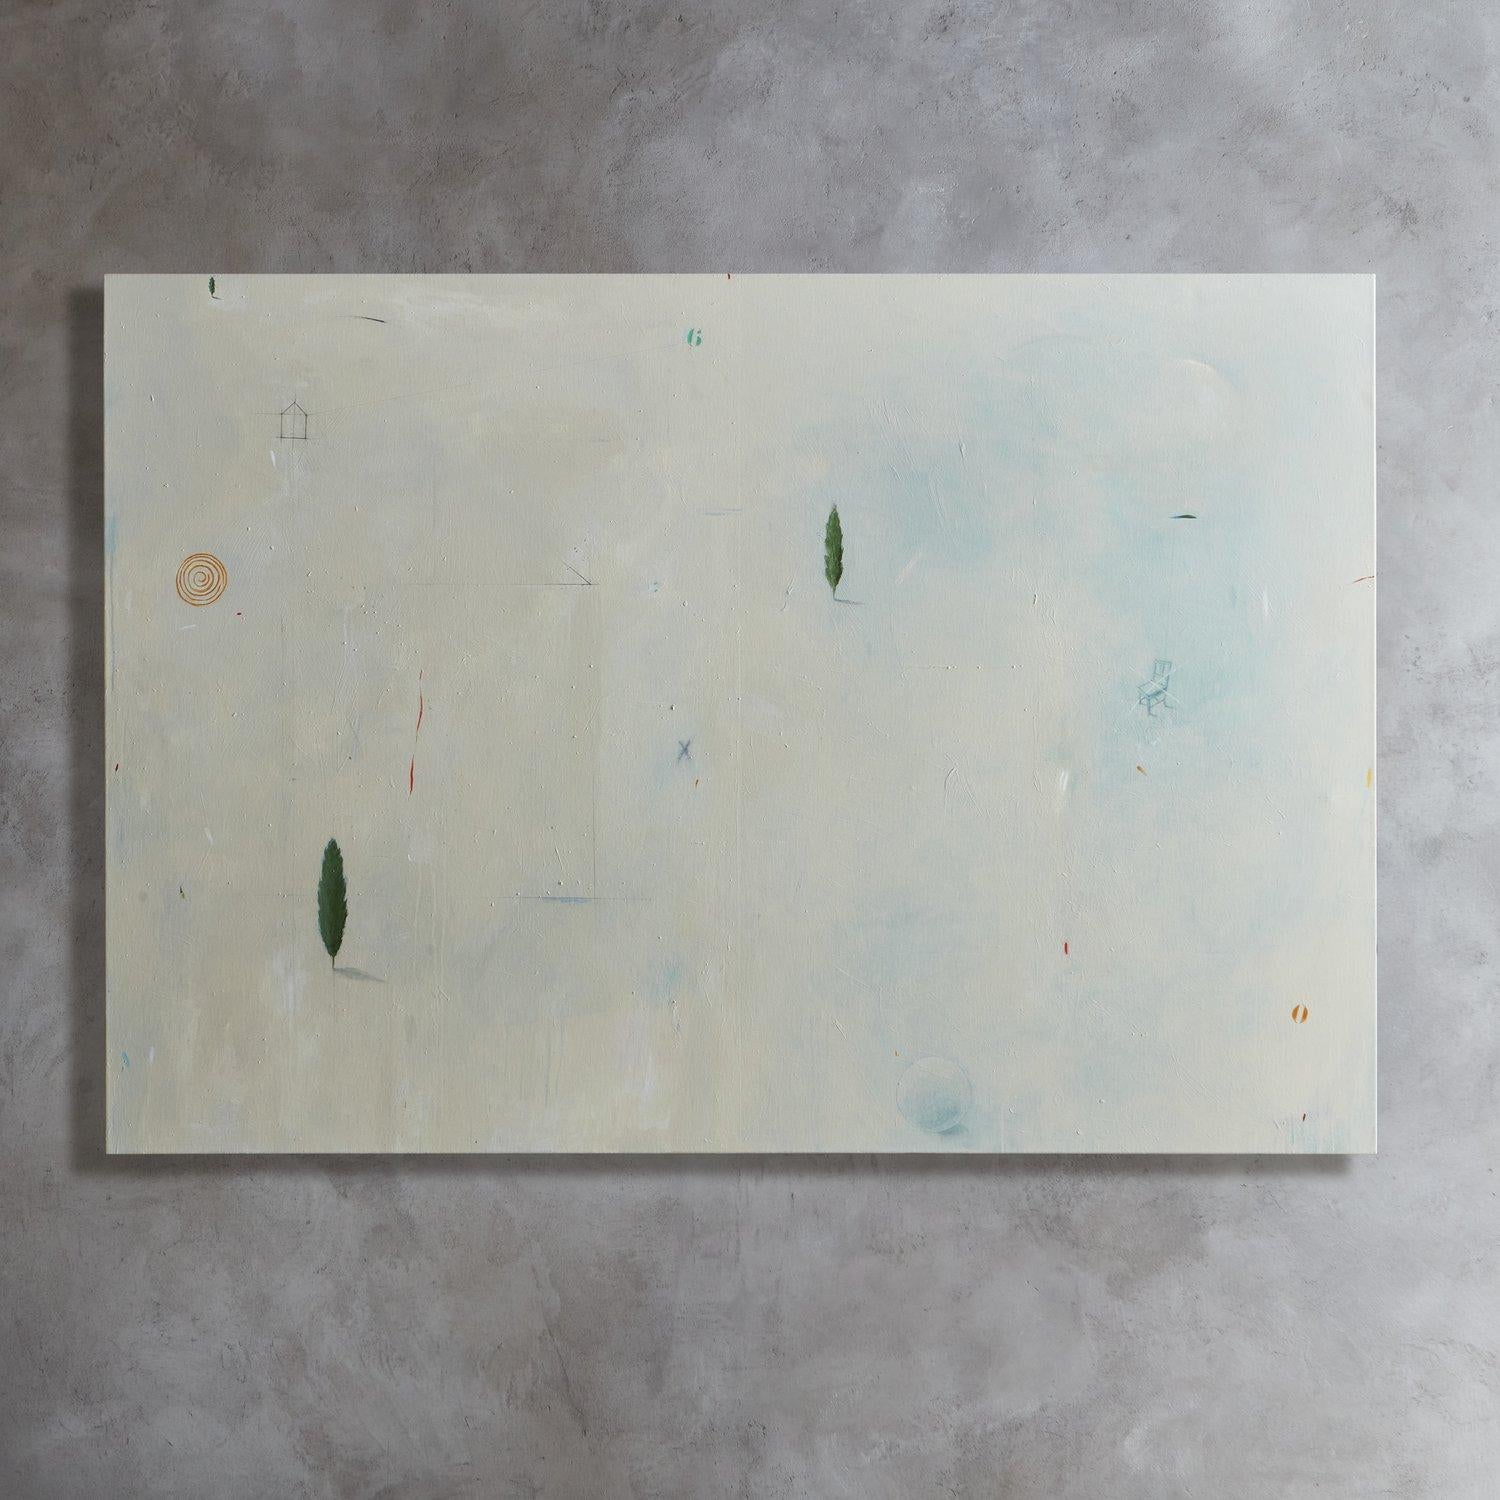 A large scale abstract mixed media painting on canvas by Chicago artist Maxine Snider, 2022. Signed en verso.

Maxine Snider is a Chicago artist and designer, with a degree from the University of Michigan’s School of Art. Following a long and